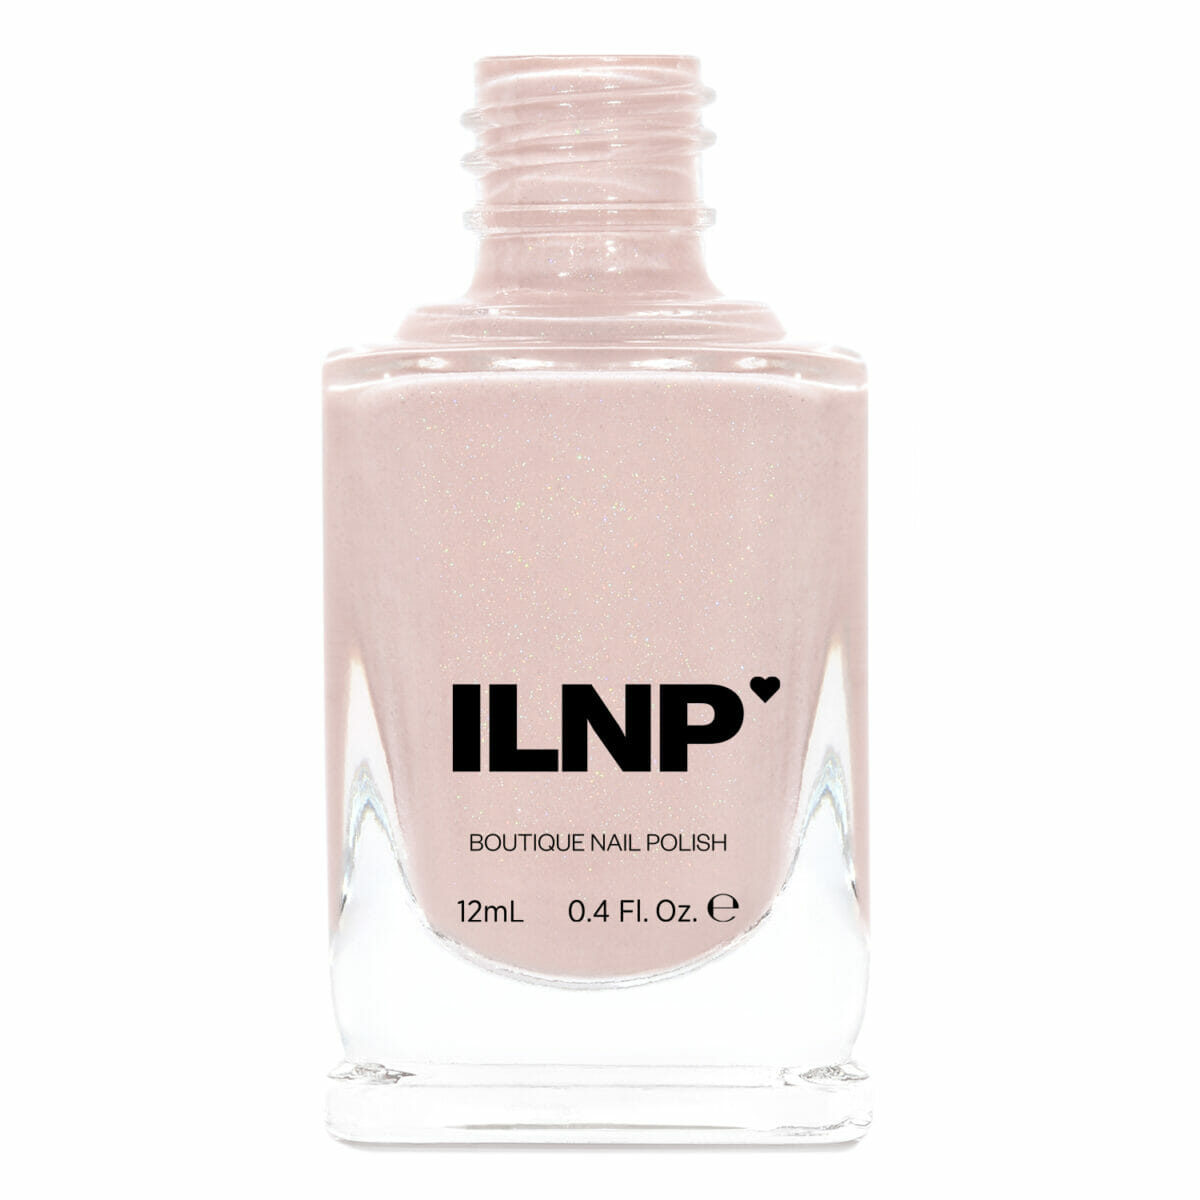 Rumor Has It - Light Nude Creme Holographic Nail Polish by ILNP